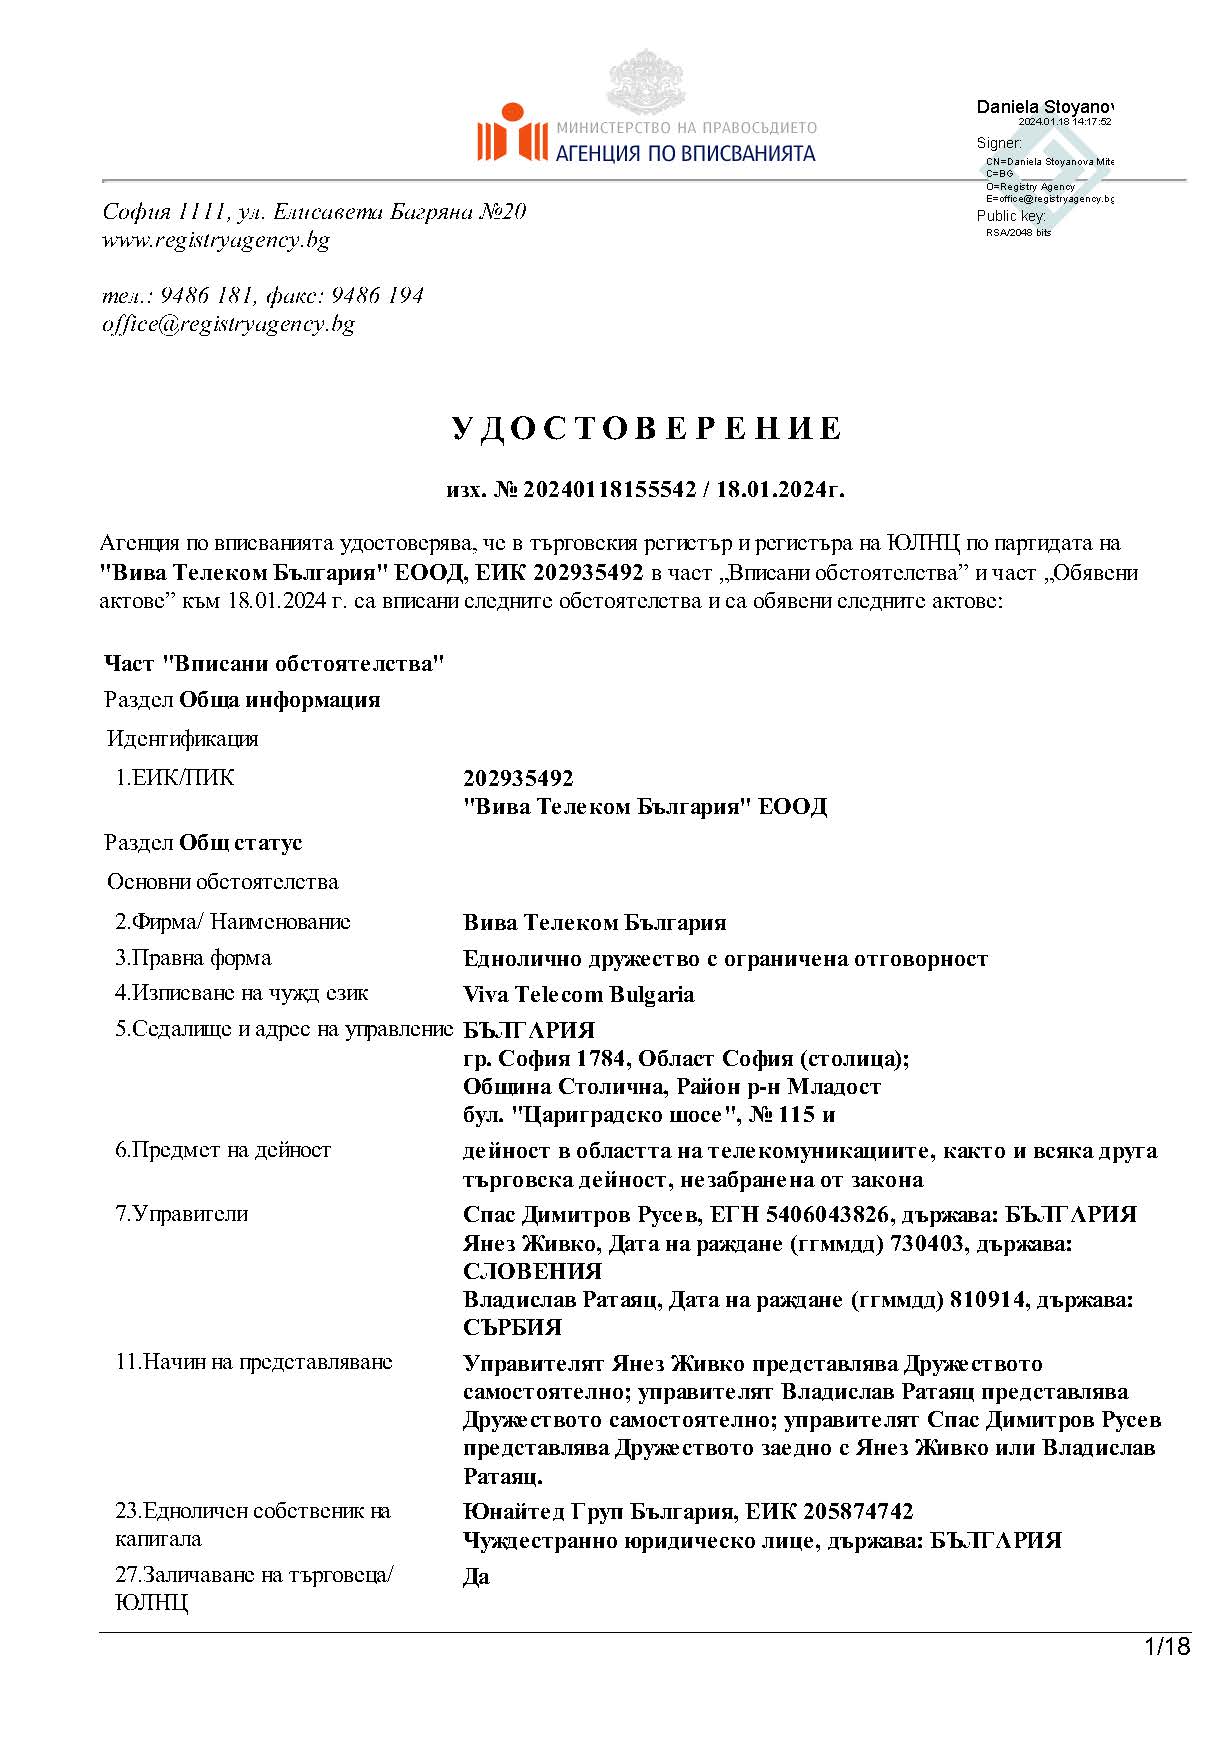 extended extract from the commercial register of Bulgaria title=